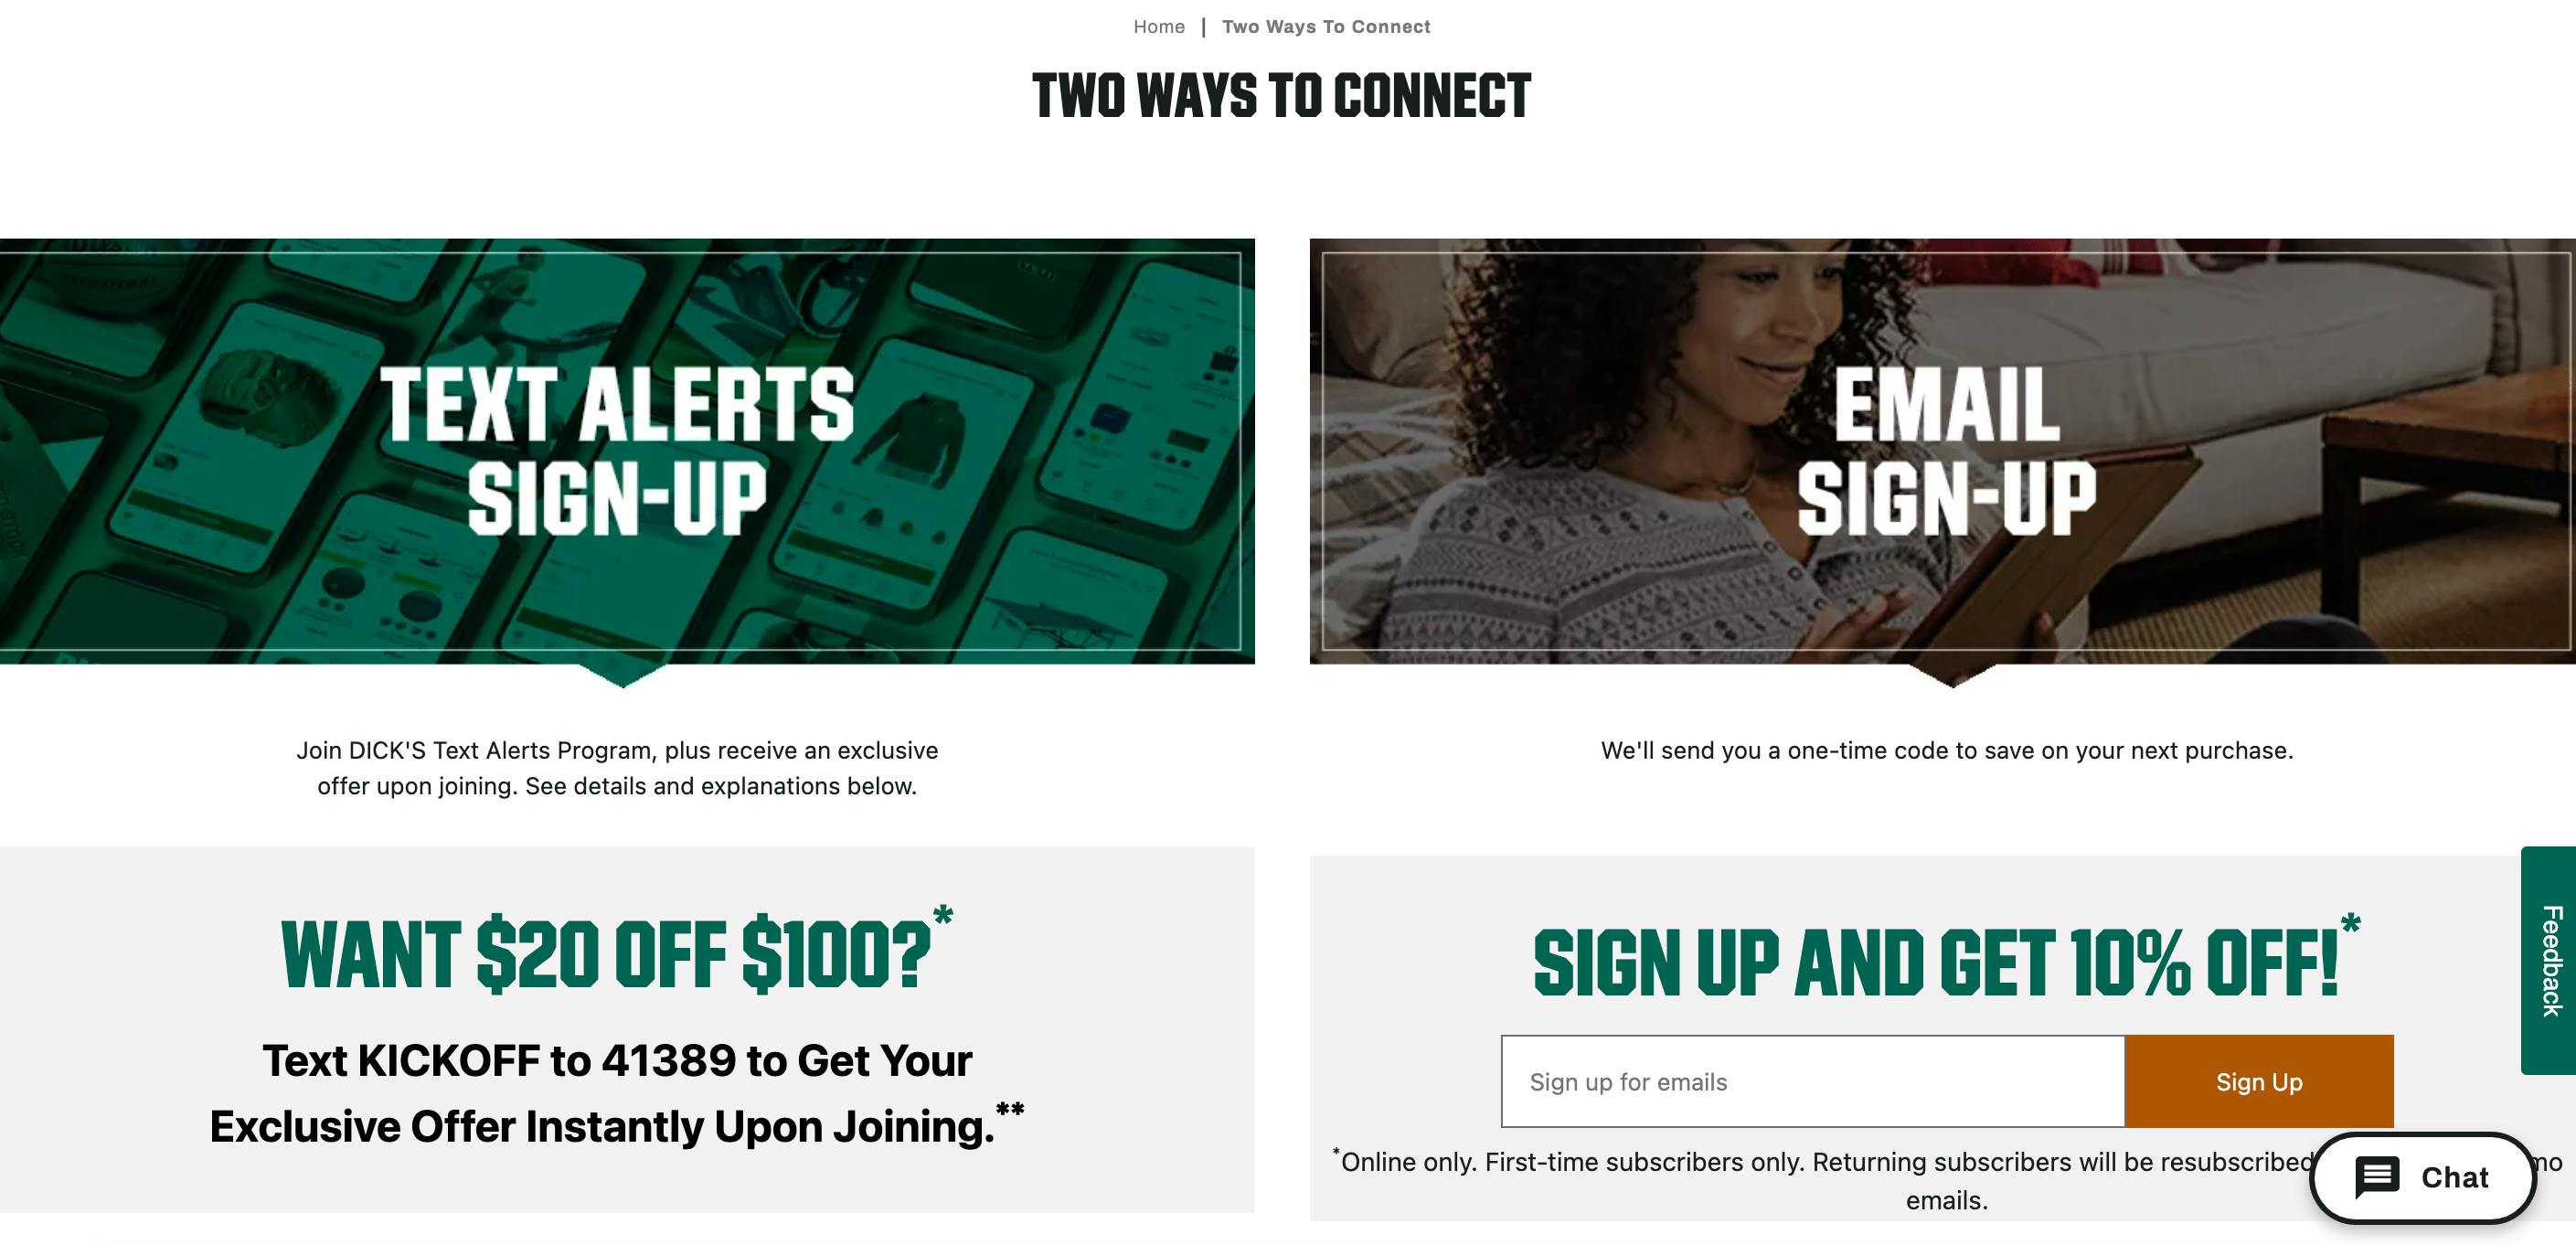 Dick's Sporting Goods text alerts and email sign-up form.